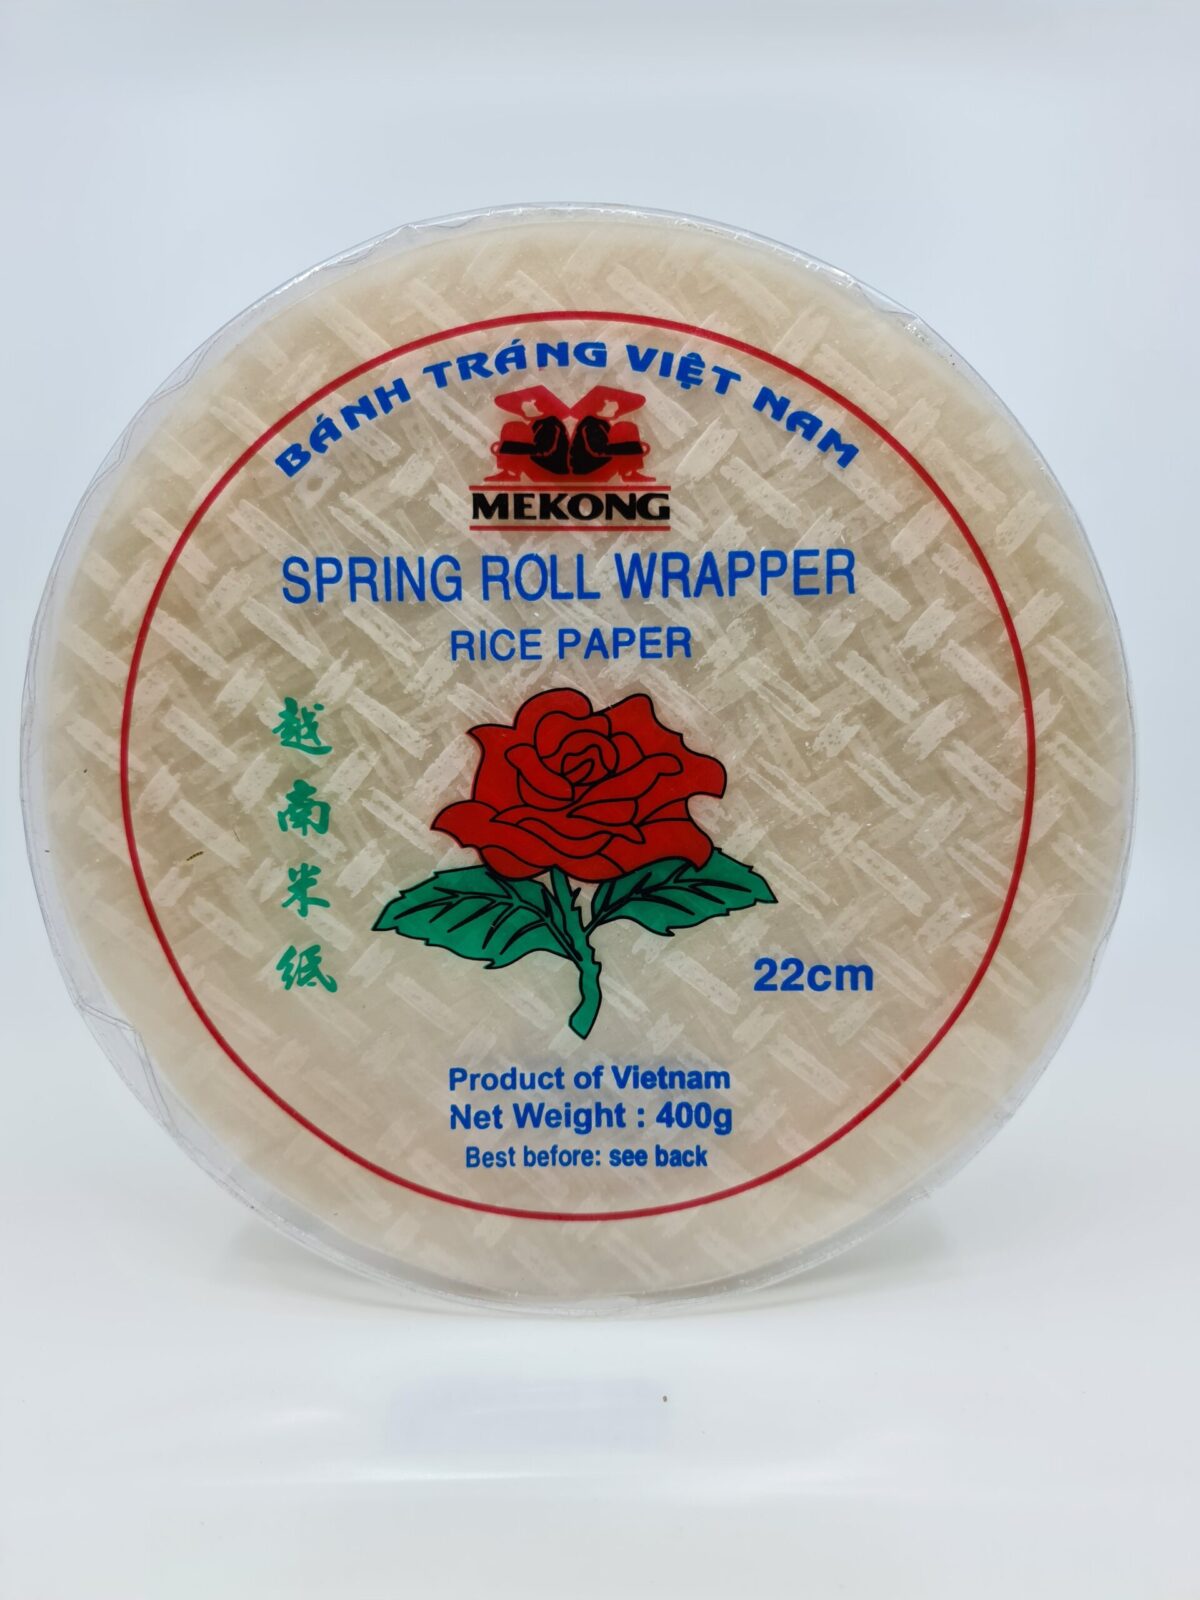 blue dragon spring roll wrapper ingredients